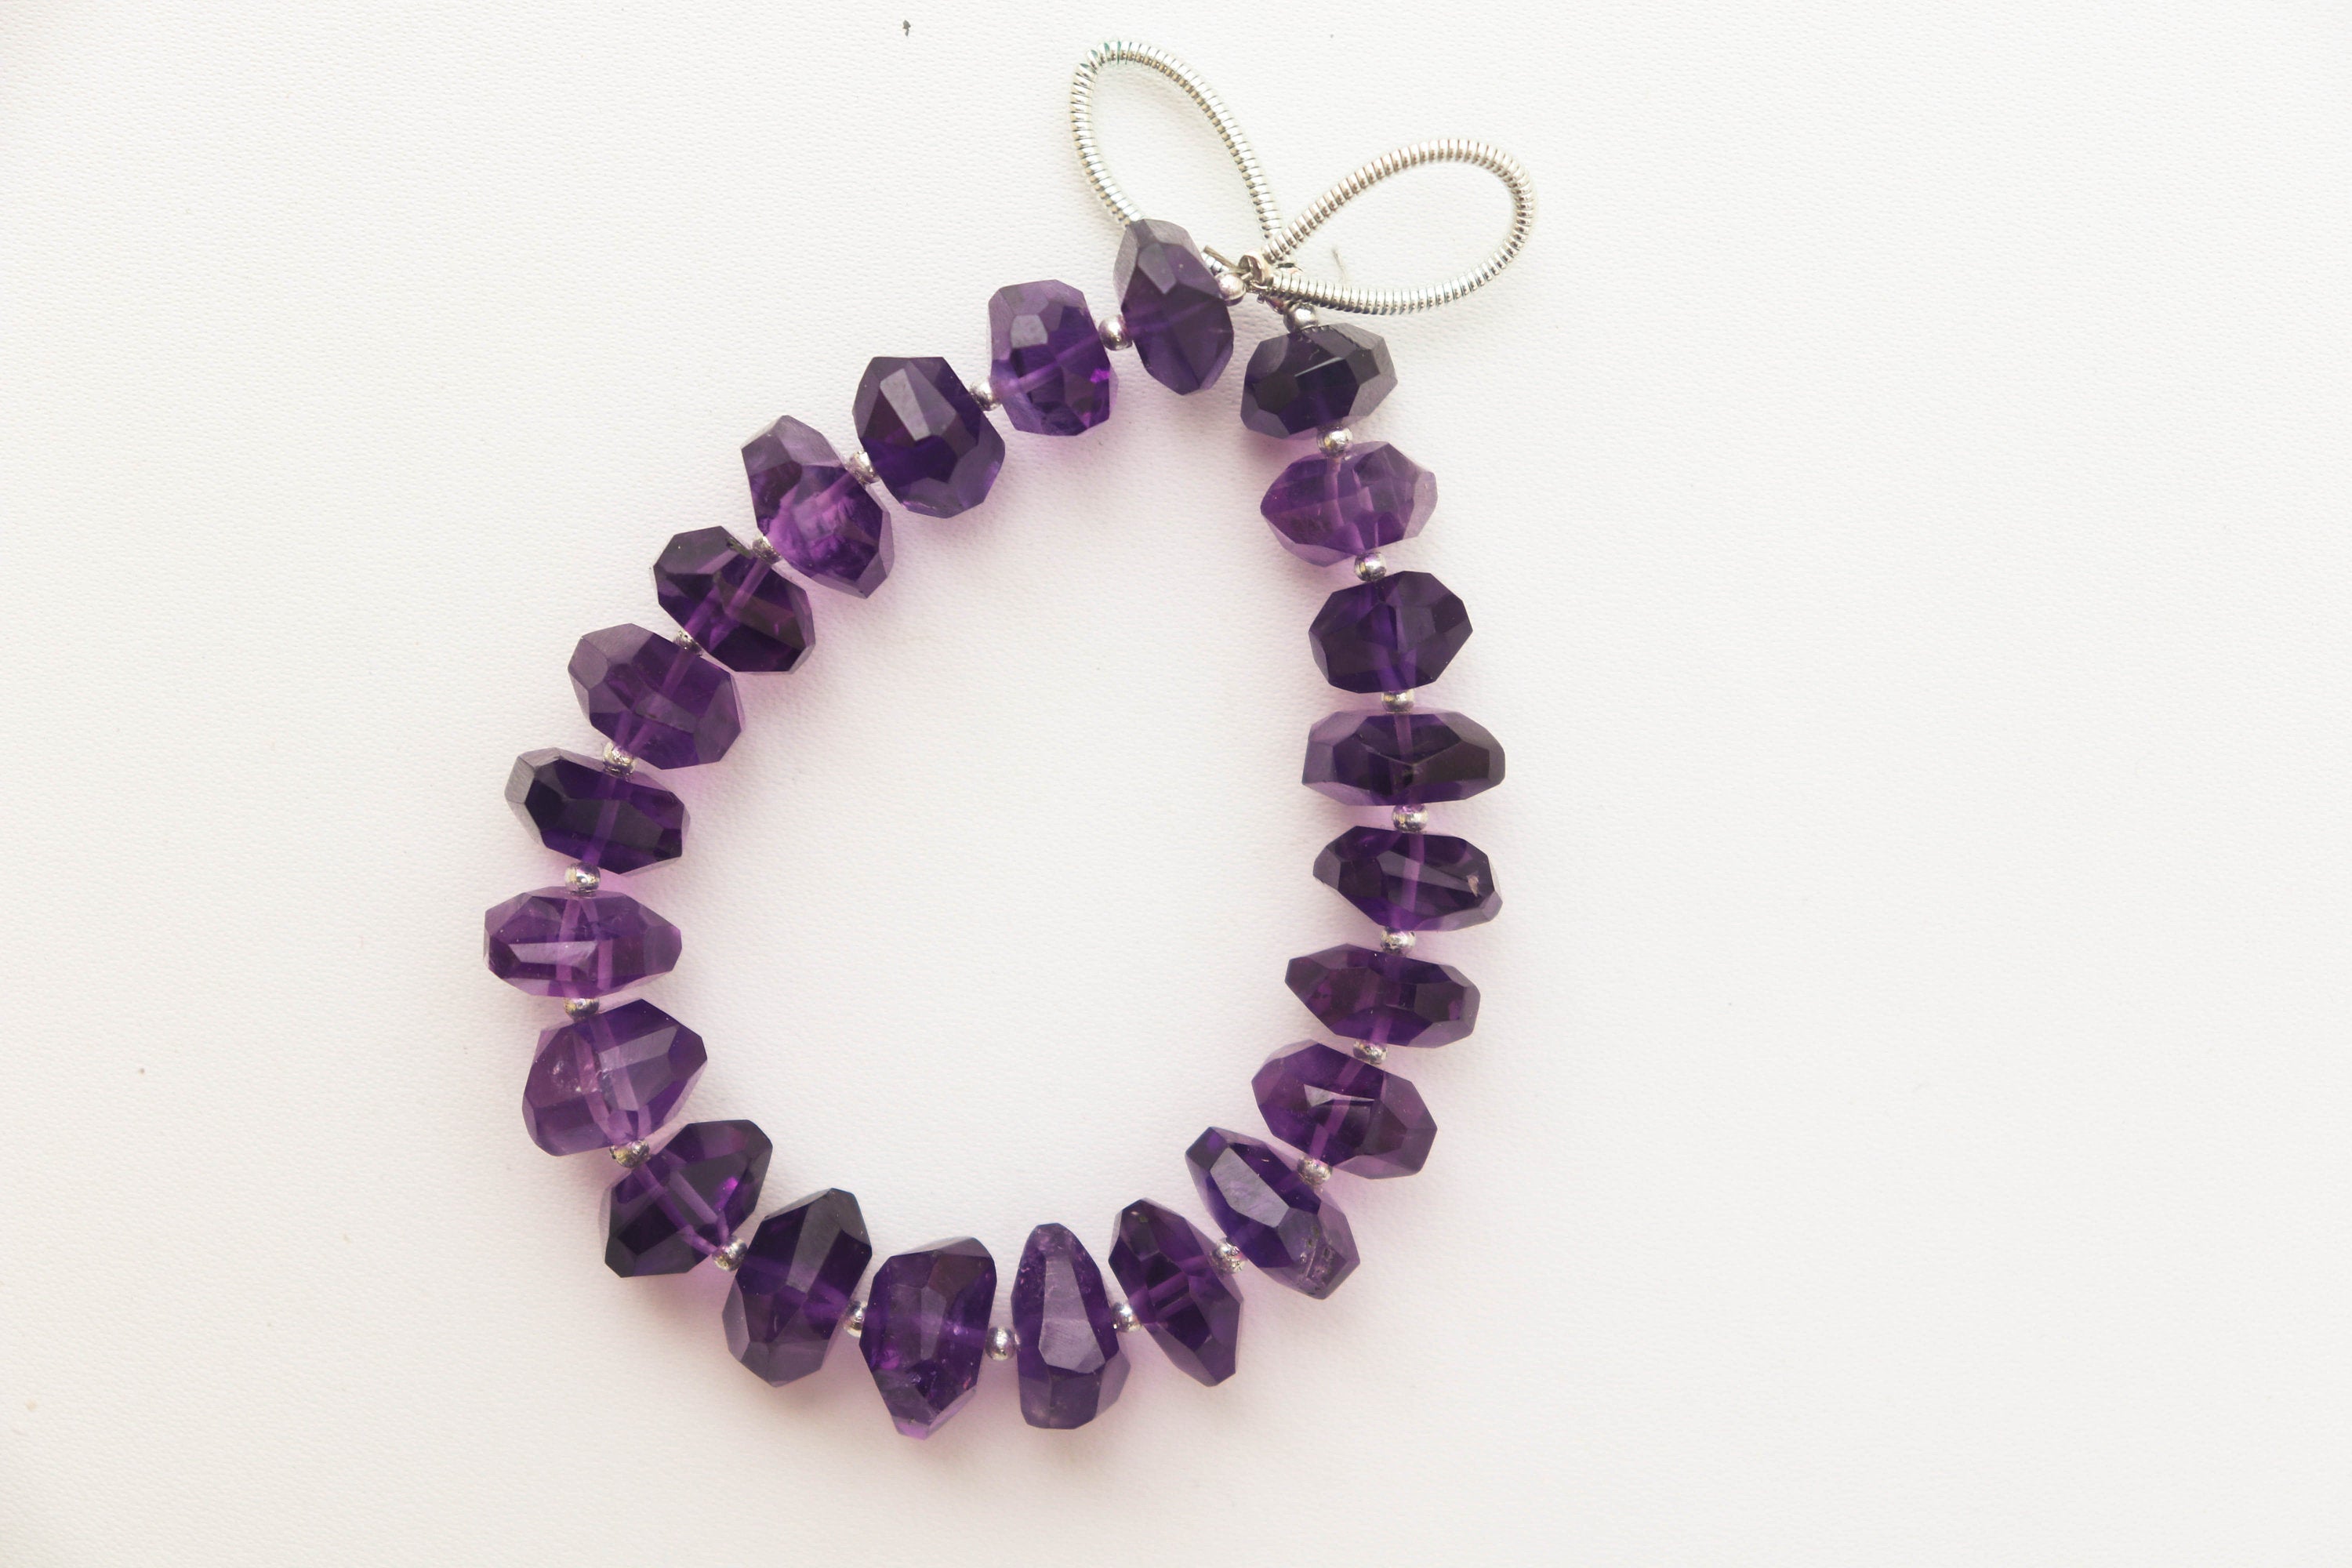 AFRICAN AMETHYST beads faceted uneven shape Amethyst Faceted Beads, Amethyst briolette, Amethyst Drops, Amethyst Gemstone beads AAA+ Beadsforyourjewelry